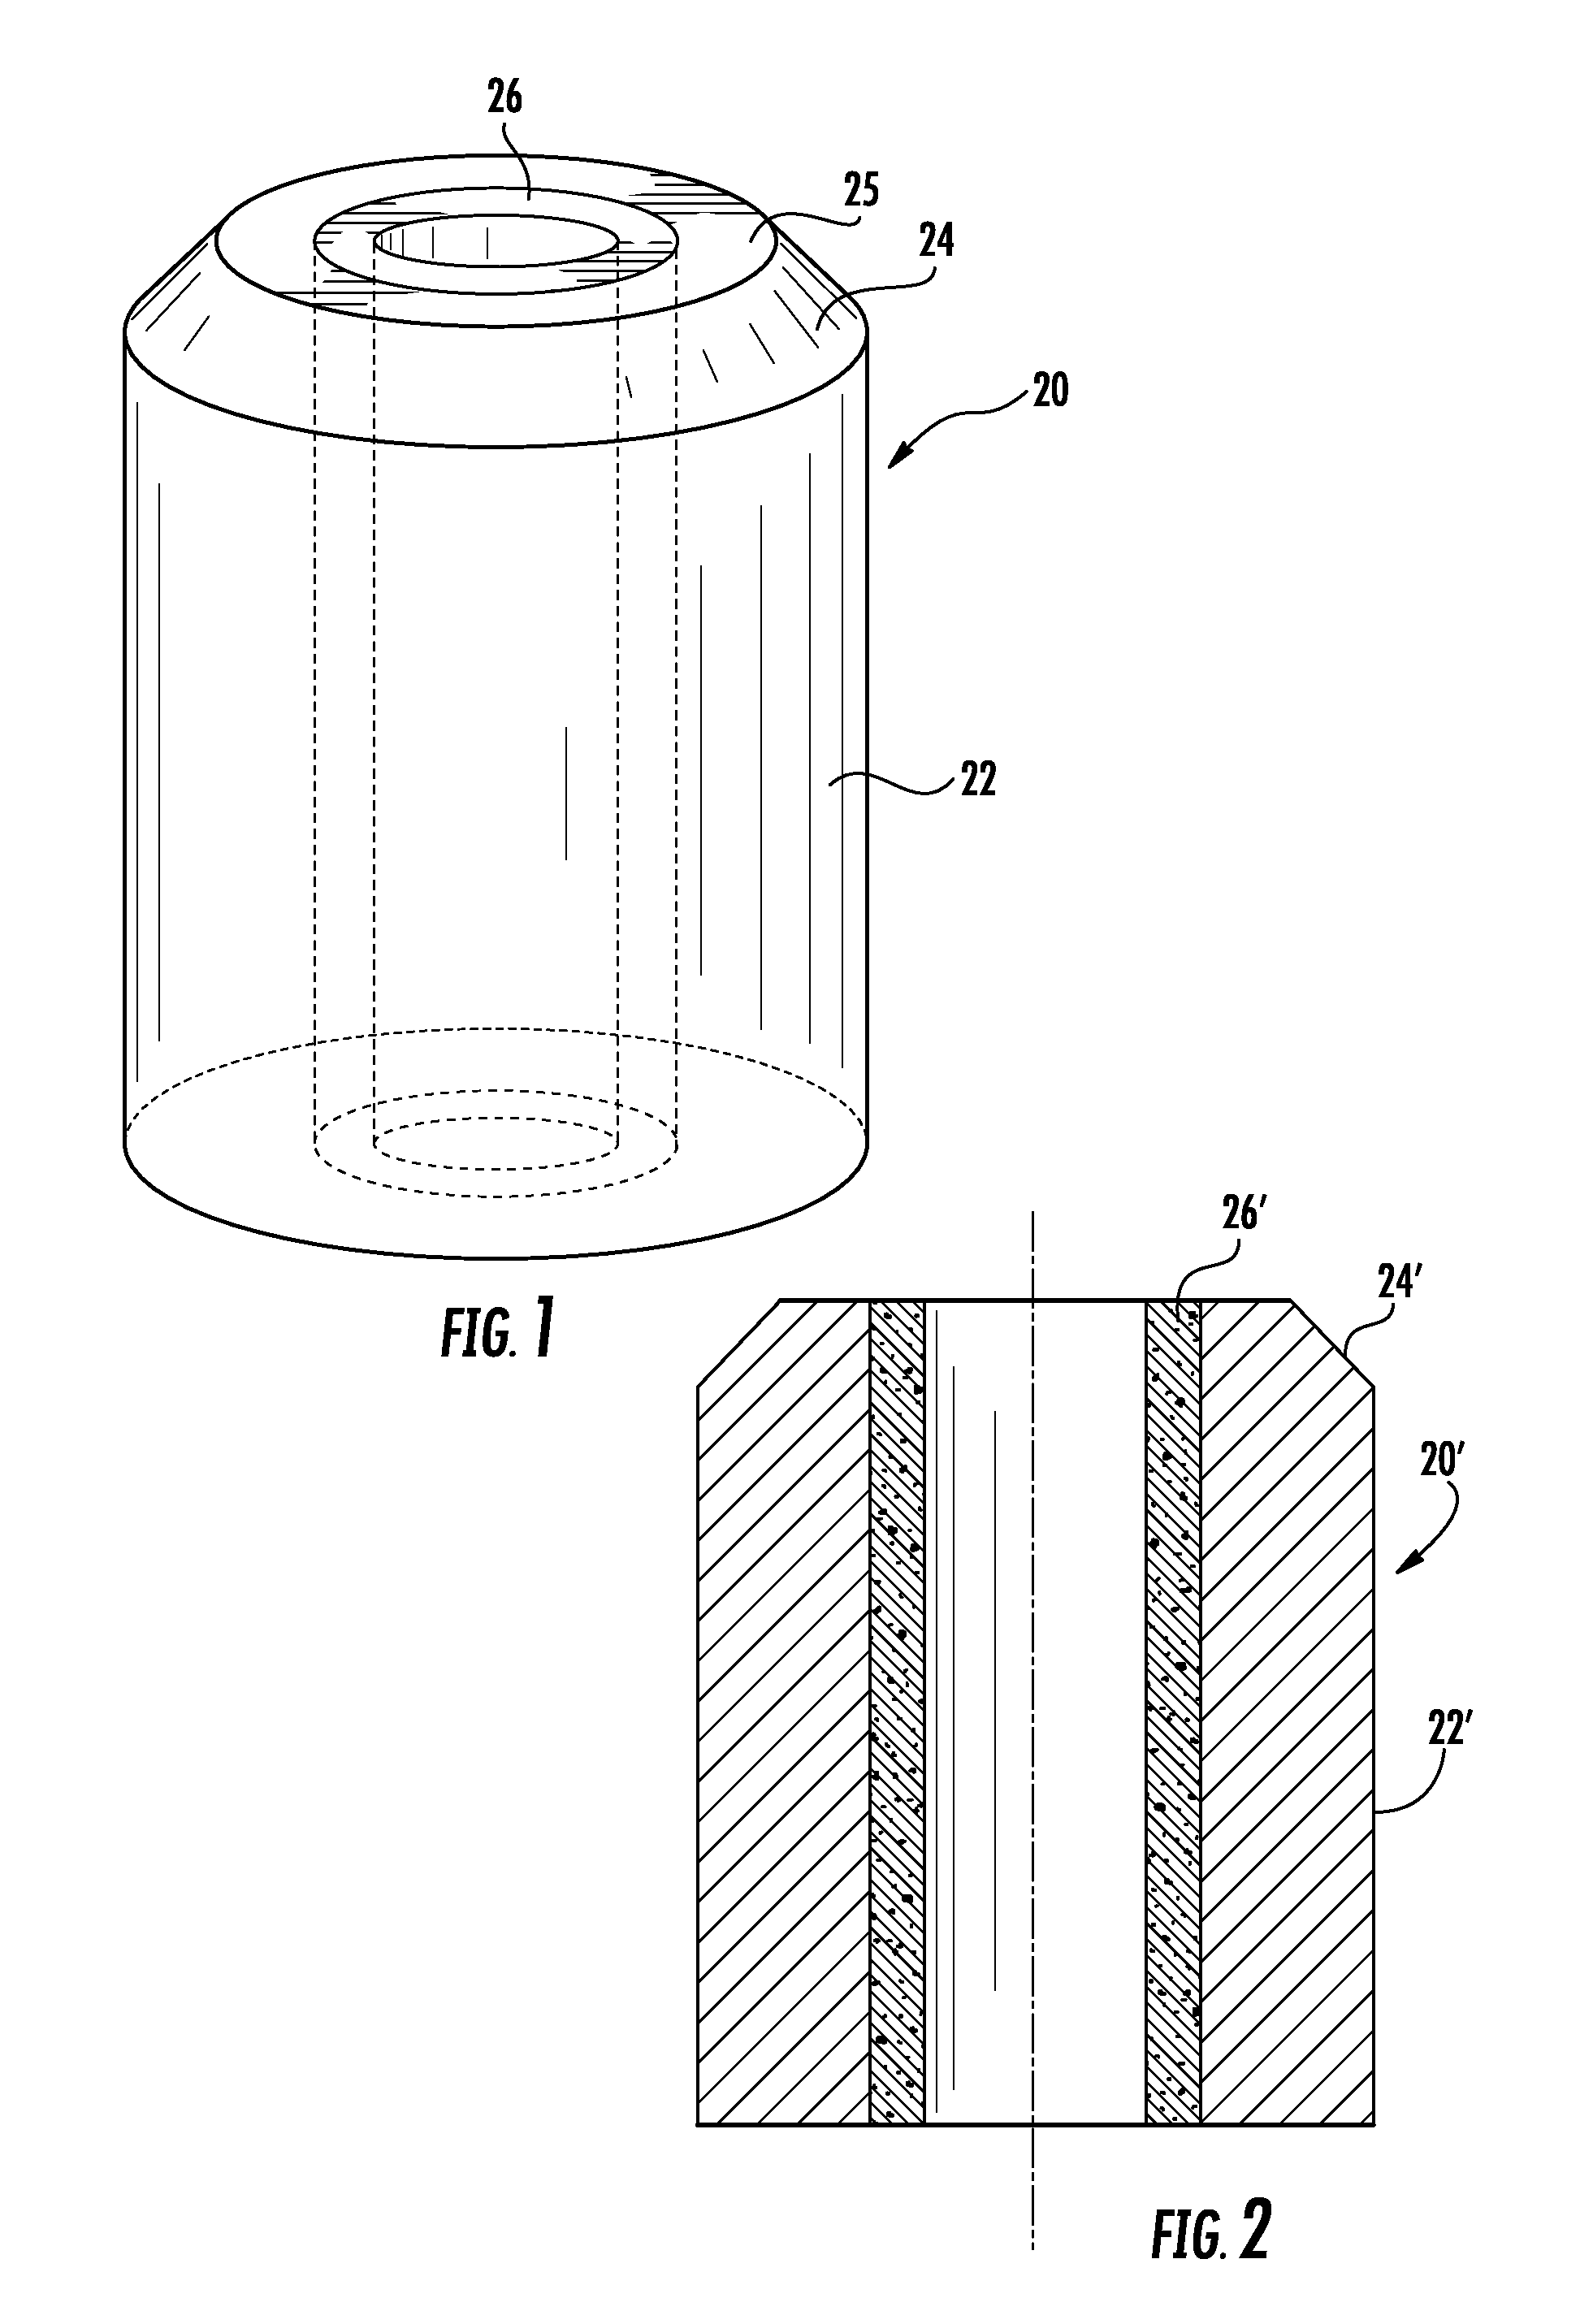 Methods for Manufacture and Use of Composite Preform Having a Controlled Fraction of Porosity in at Least One Layer